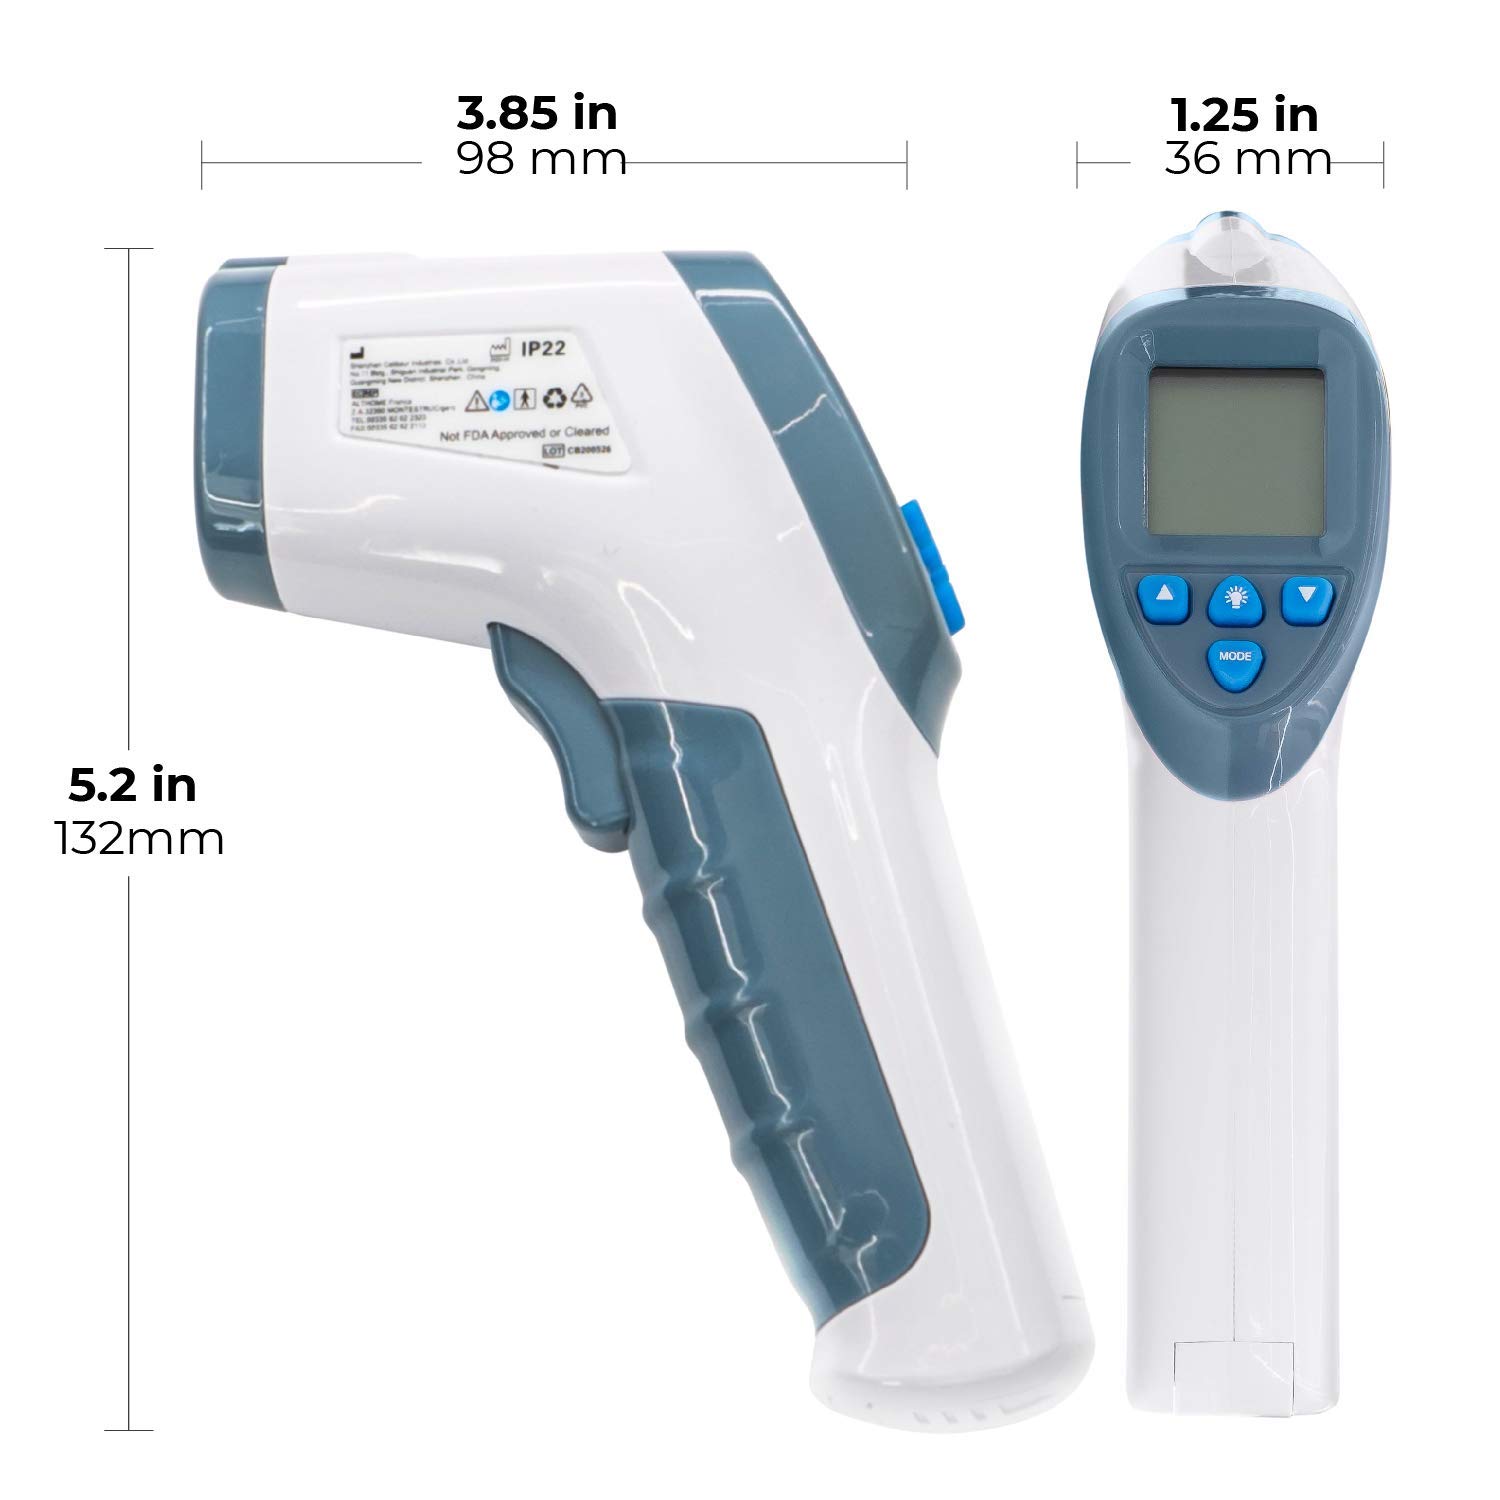 Aain A8837 10 pcs Forehead Thermometer, Baby and Adults Thermometer,Digital Non-Contact Forehead Infrared Thermometer, Backlight LCD Screen with Date Memory (32 Readings)